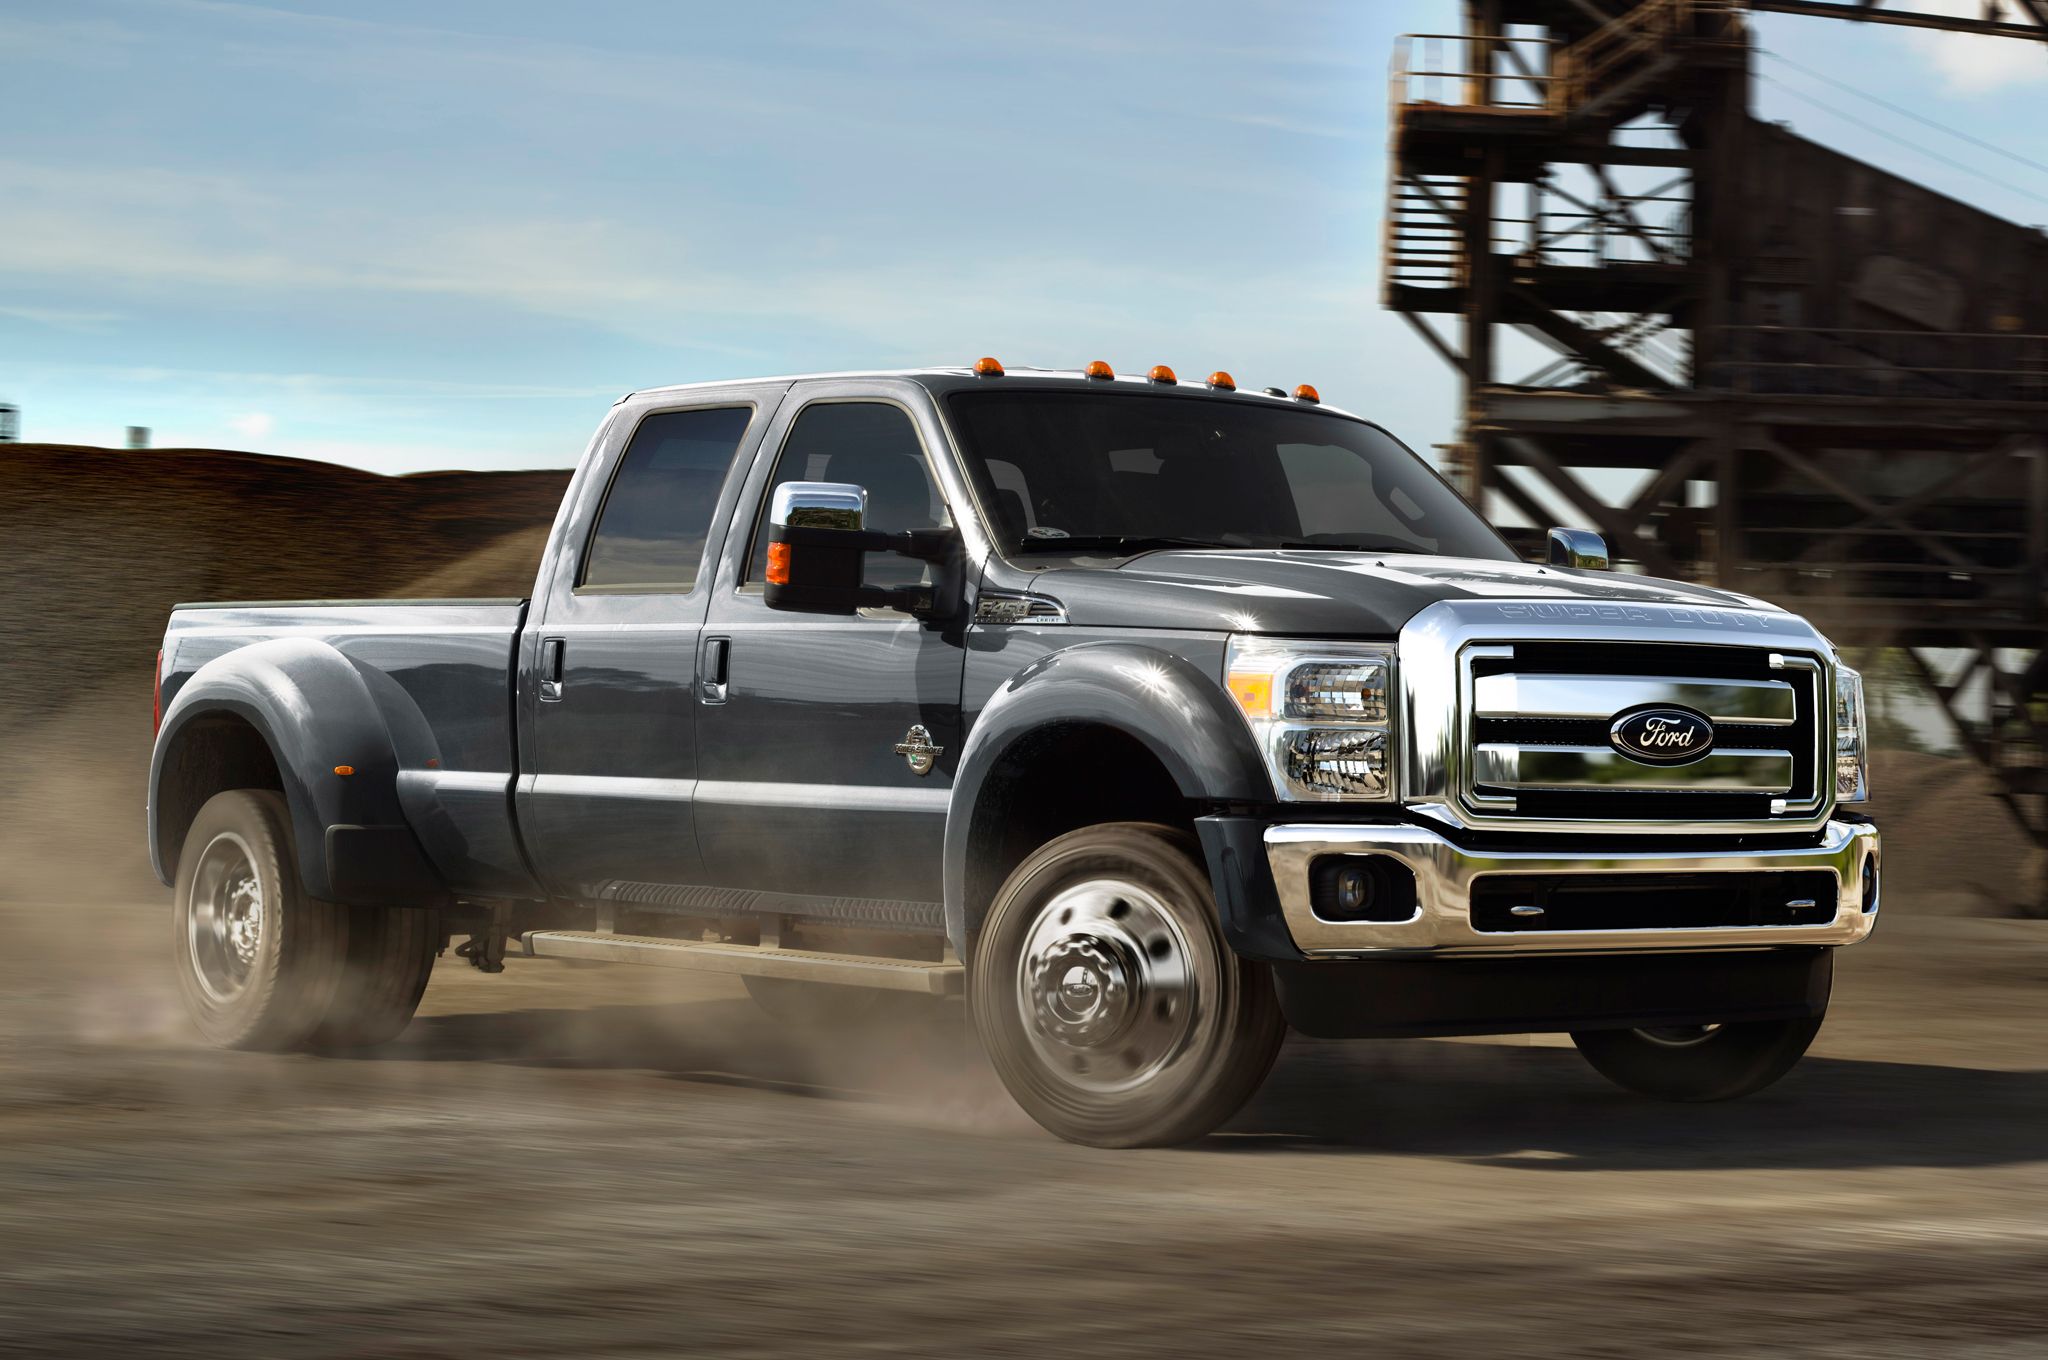 2015-ford-f-450-super-duty-front-view-in-motion - AB&T Diesel Repair